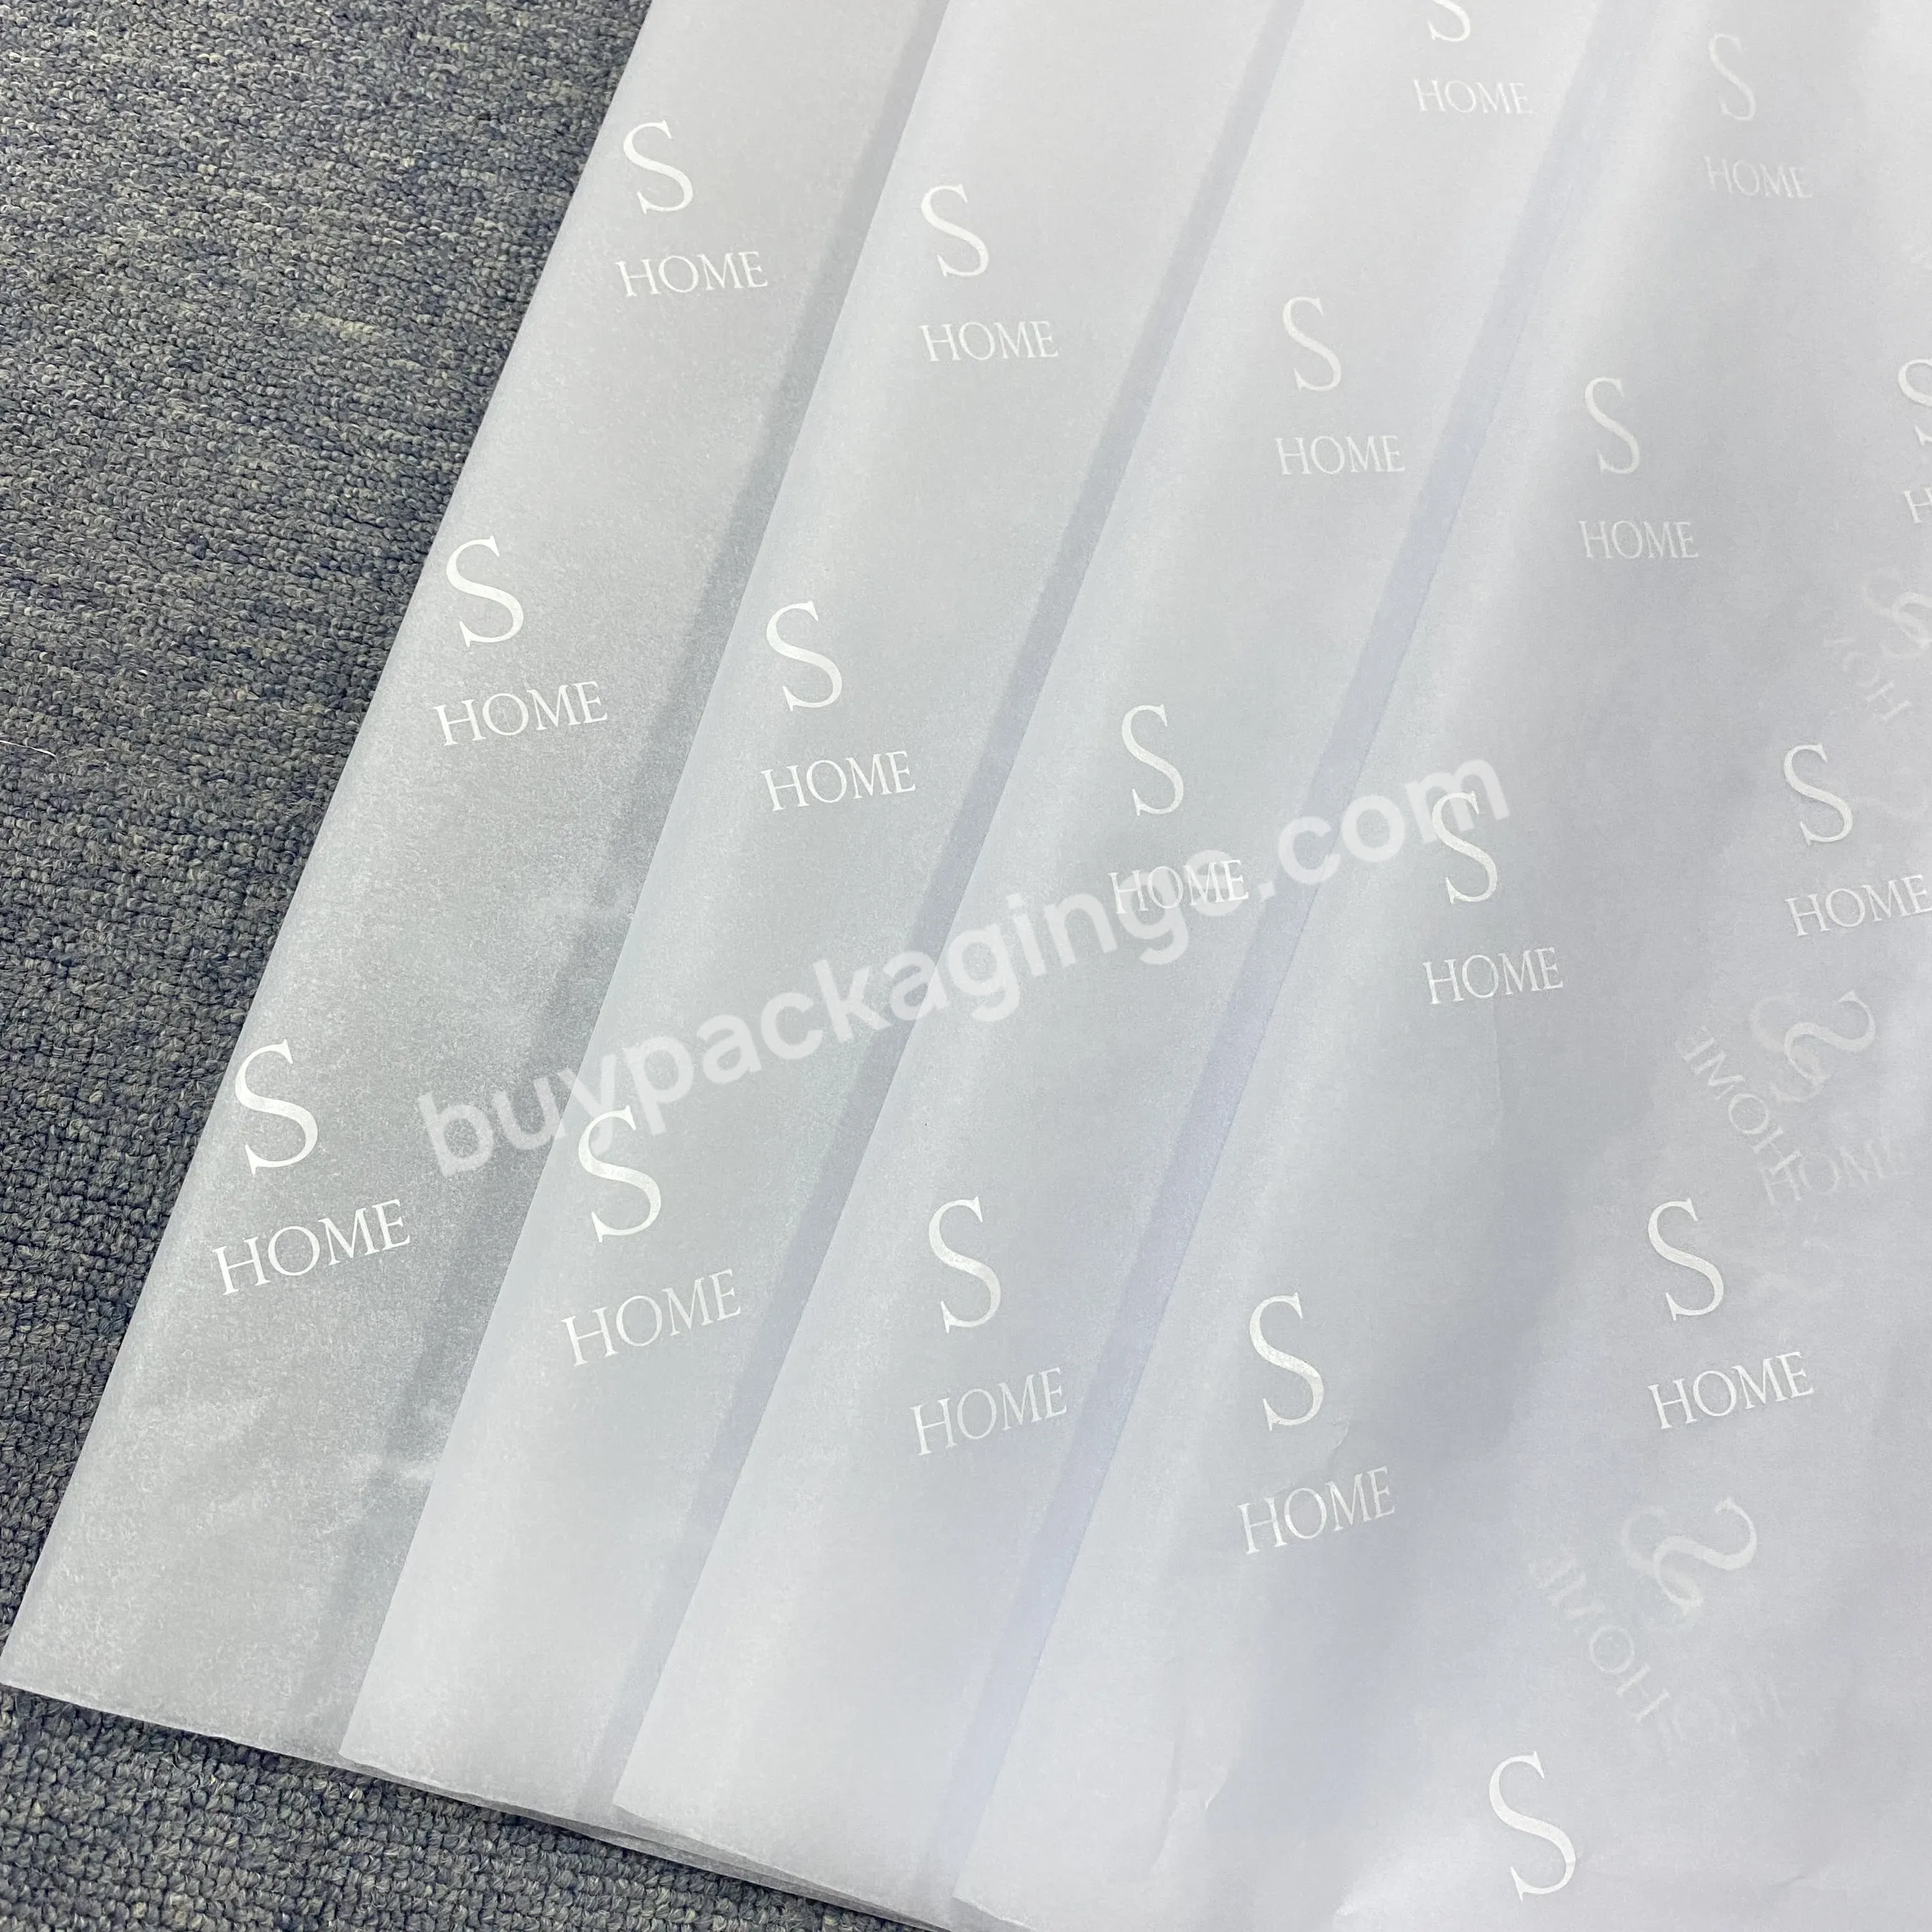 Wholesale Custom Printed Garment Wrapping Paper With High Quality Brand Name Logo Printing - Buy Wrapping Flowers And Clothing,Moq Is 100 Pcs,Customized Logo And Size.